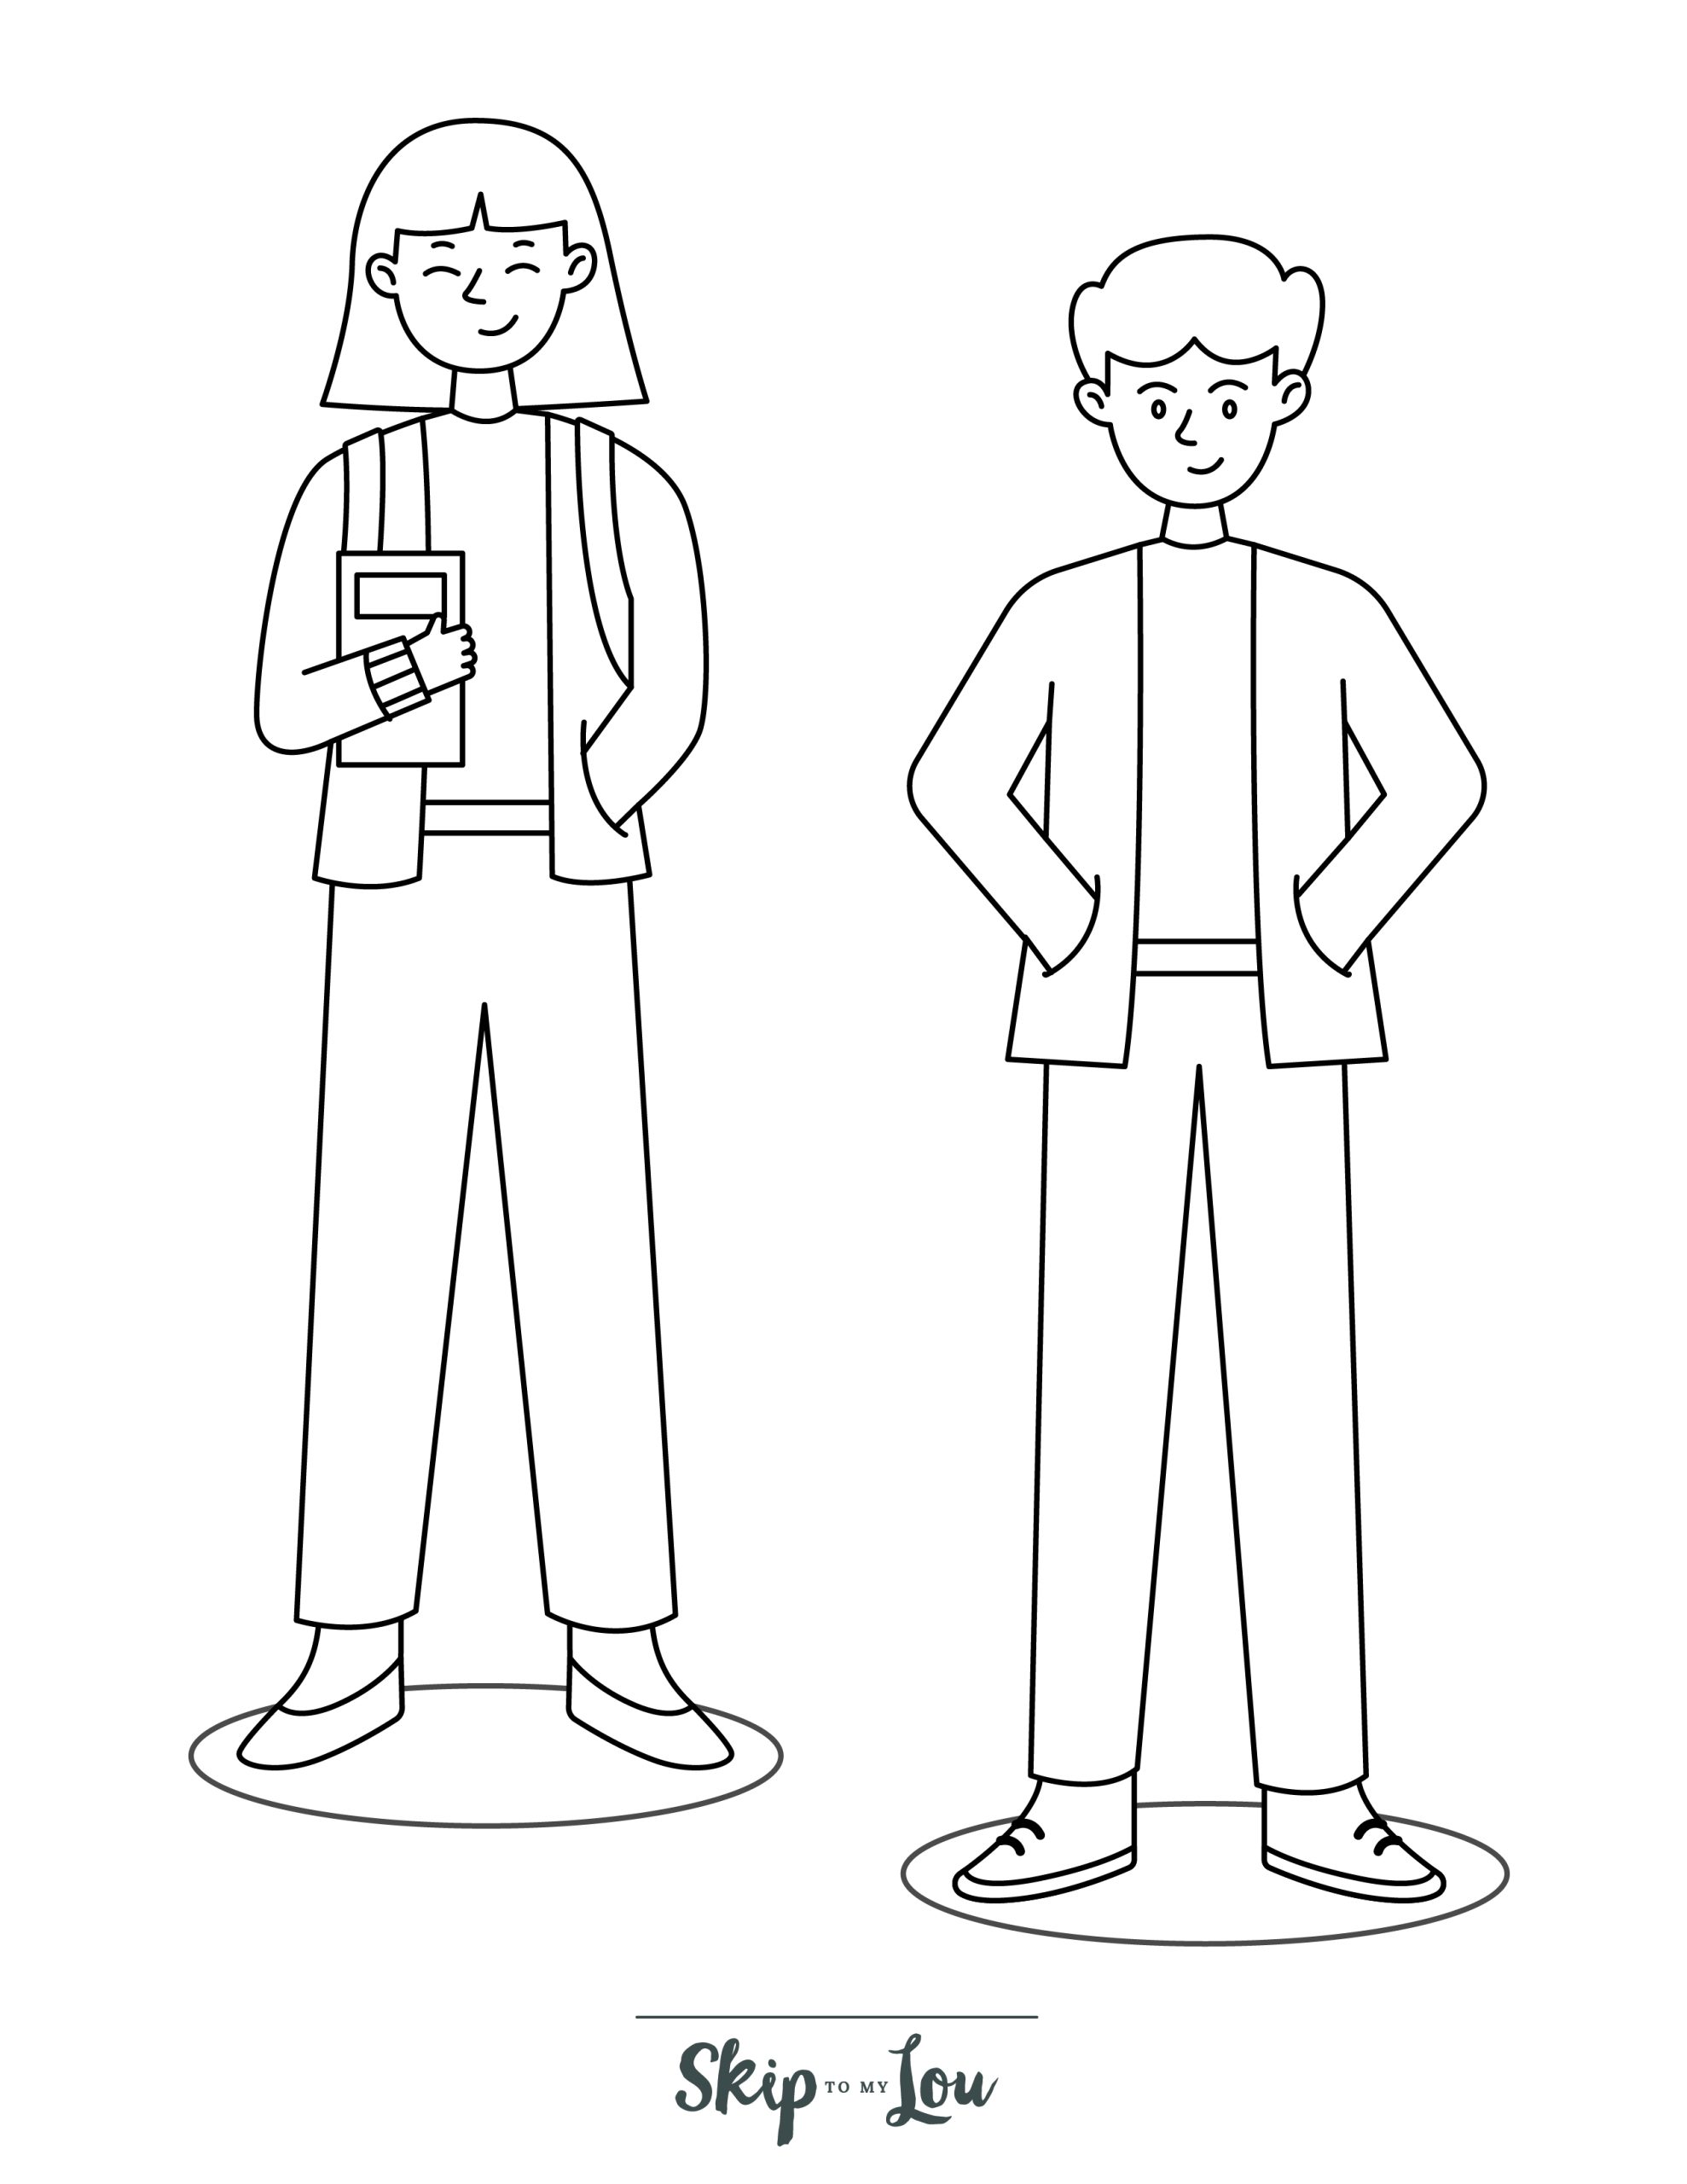 People Coloring Page 7 - Line drawing of two young people